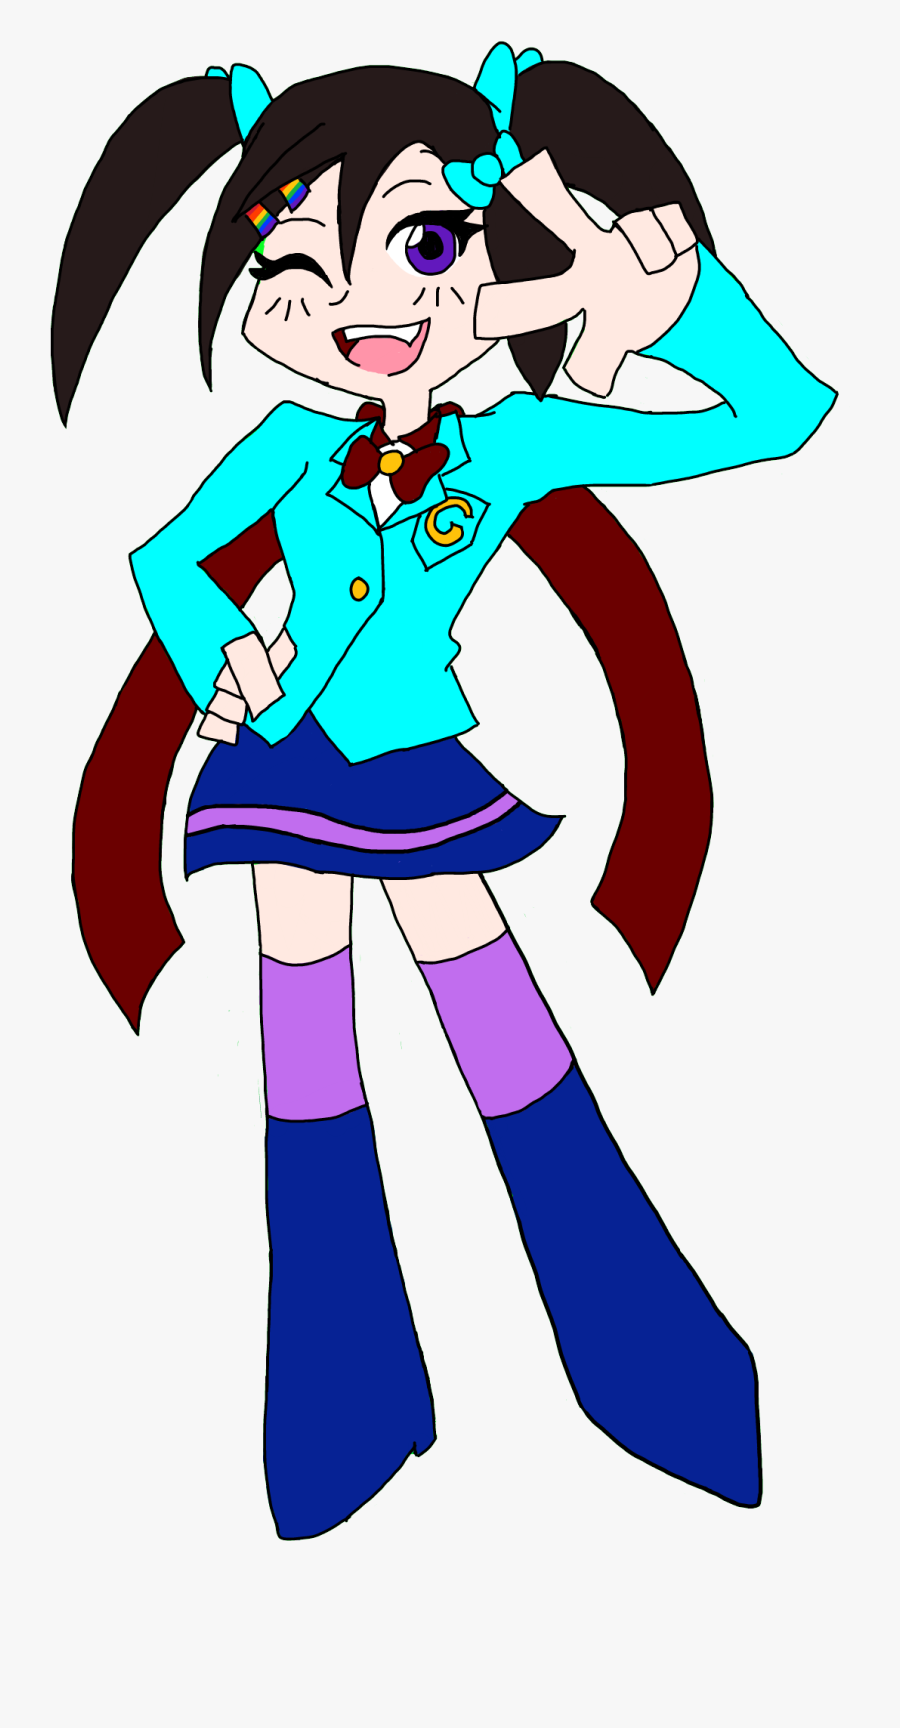 Image Png Utau Wiki Fandom Powered By - Cartoon Png For Picsart, Transparent Clipart